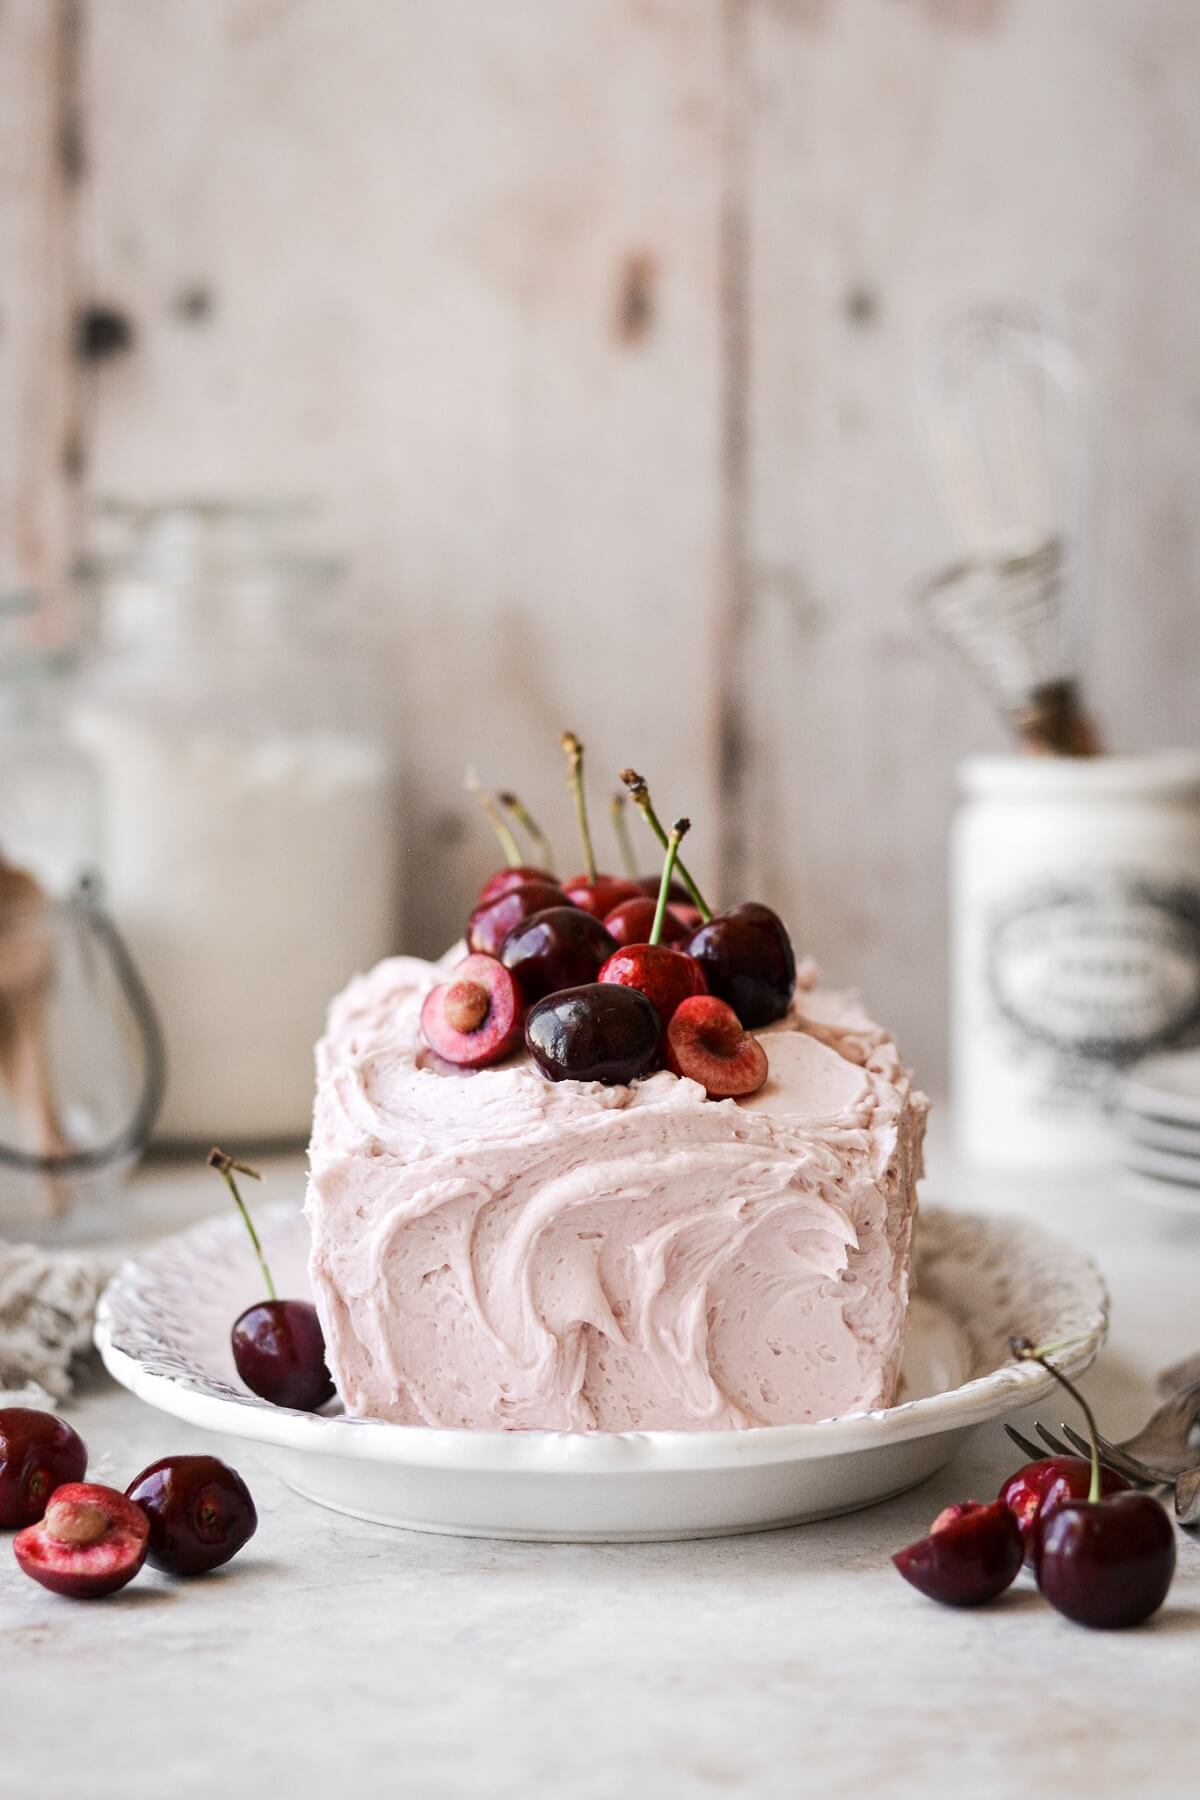 Loaf cake with cherry buttercream and fresh cherries.